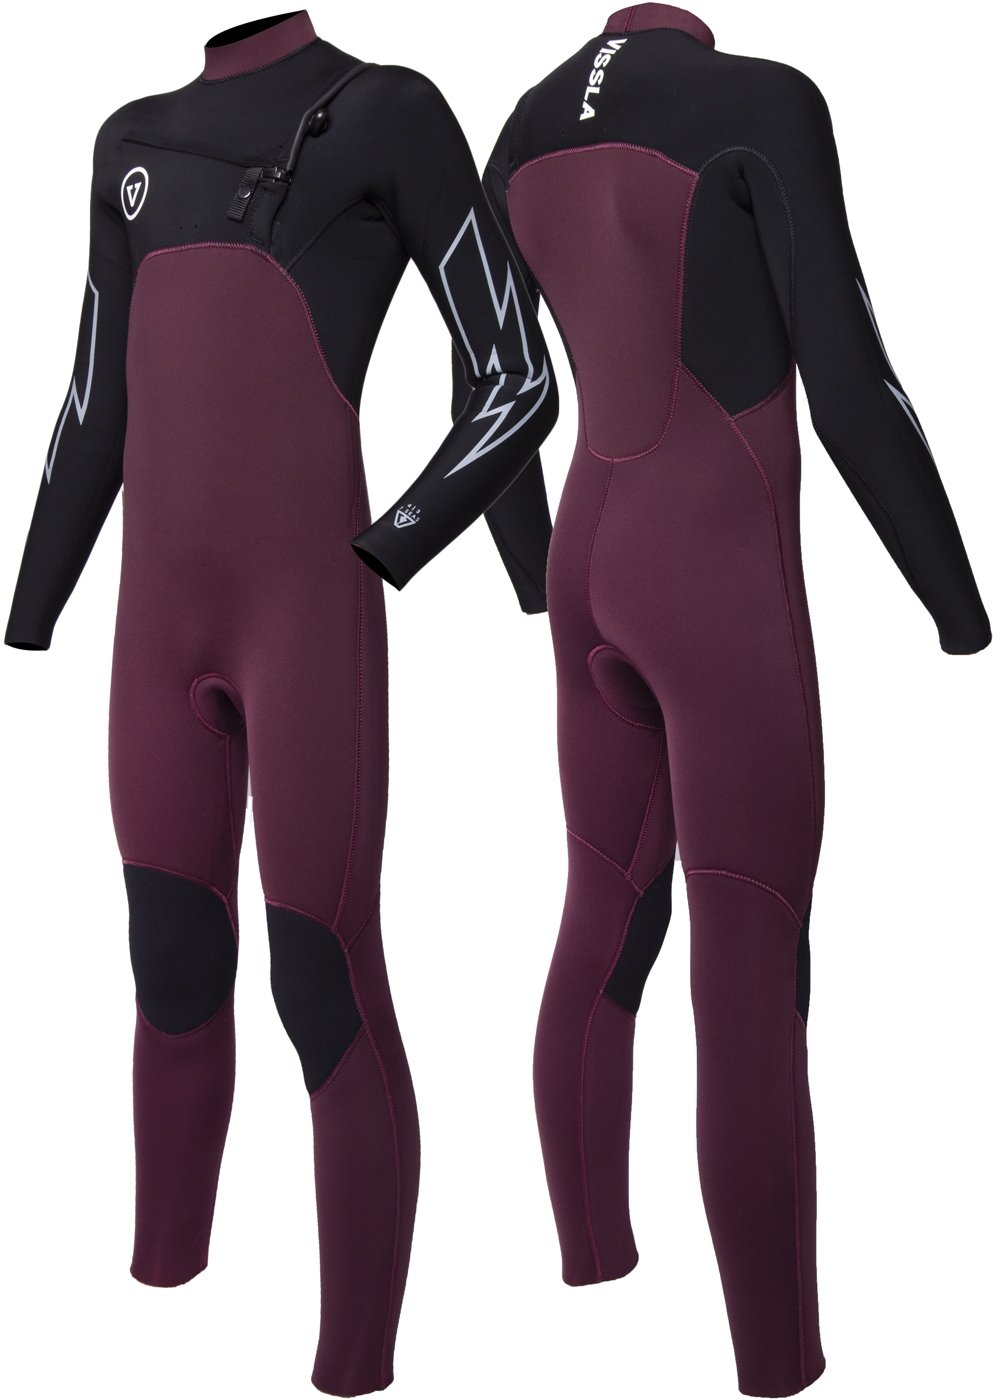 Vissla Boys wine and black 7 Seas 3-2 bolt chest zip full wetsuit. front and back view